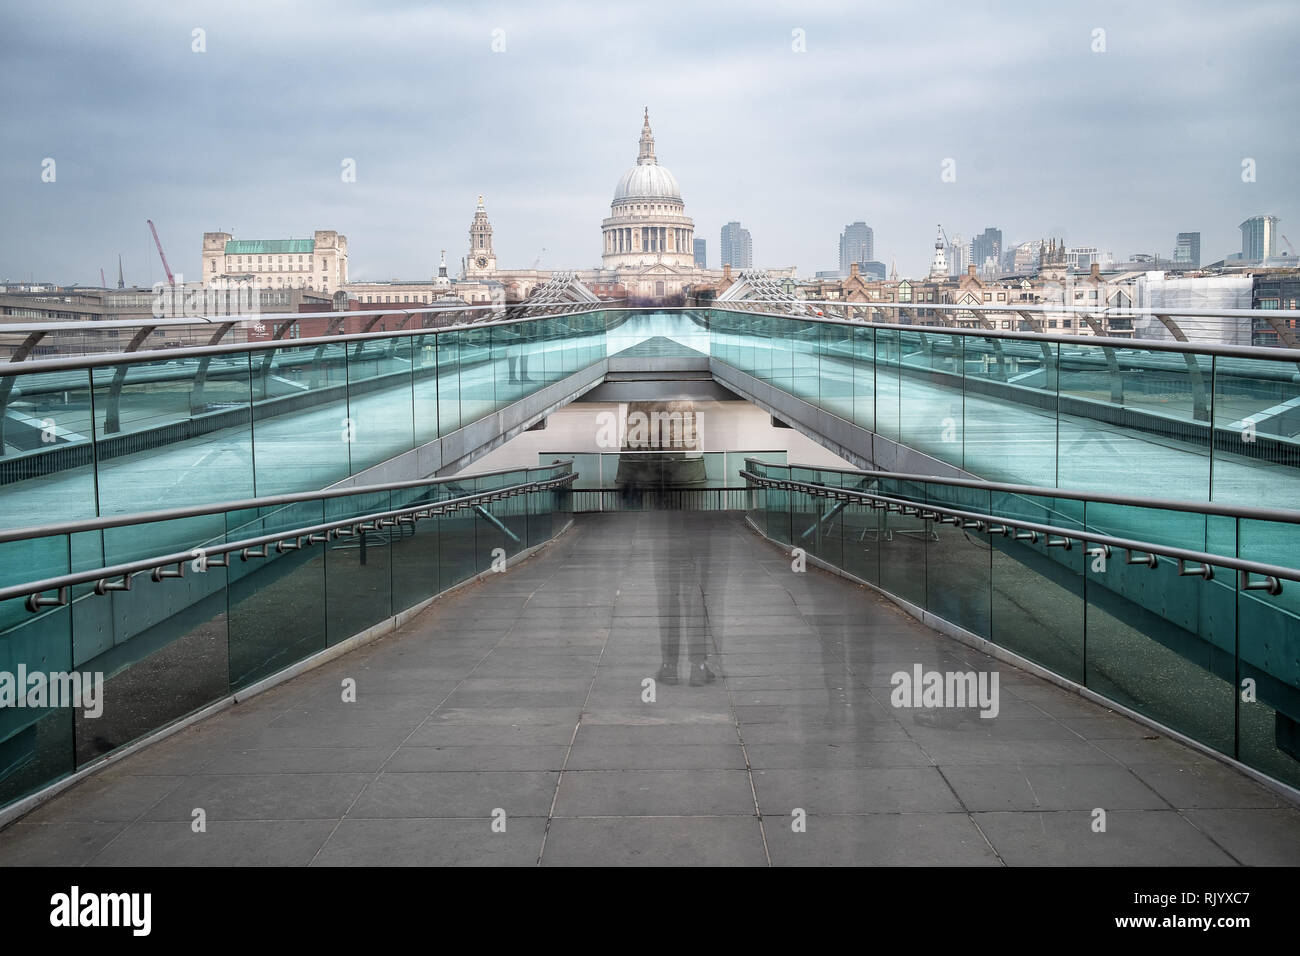 A 30 second exposure was used to blur some of the people on the Millennium Foot Bridge, London, England. It spans the River Thames towards St Pauls. Stock Photo